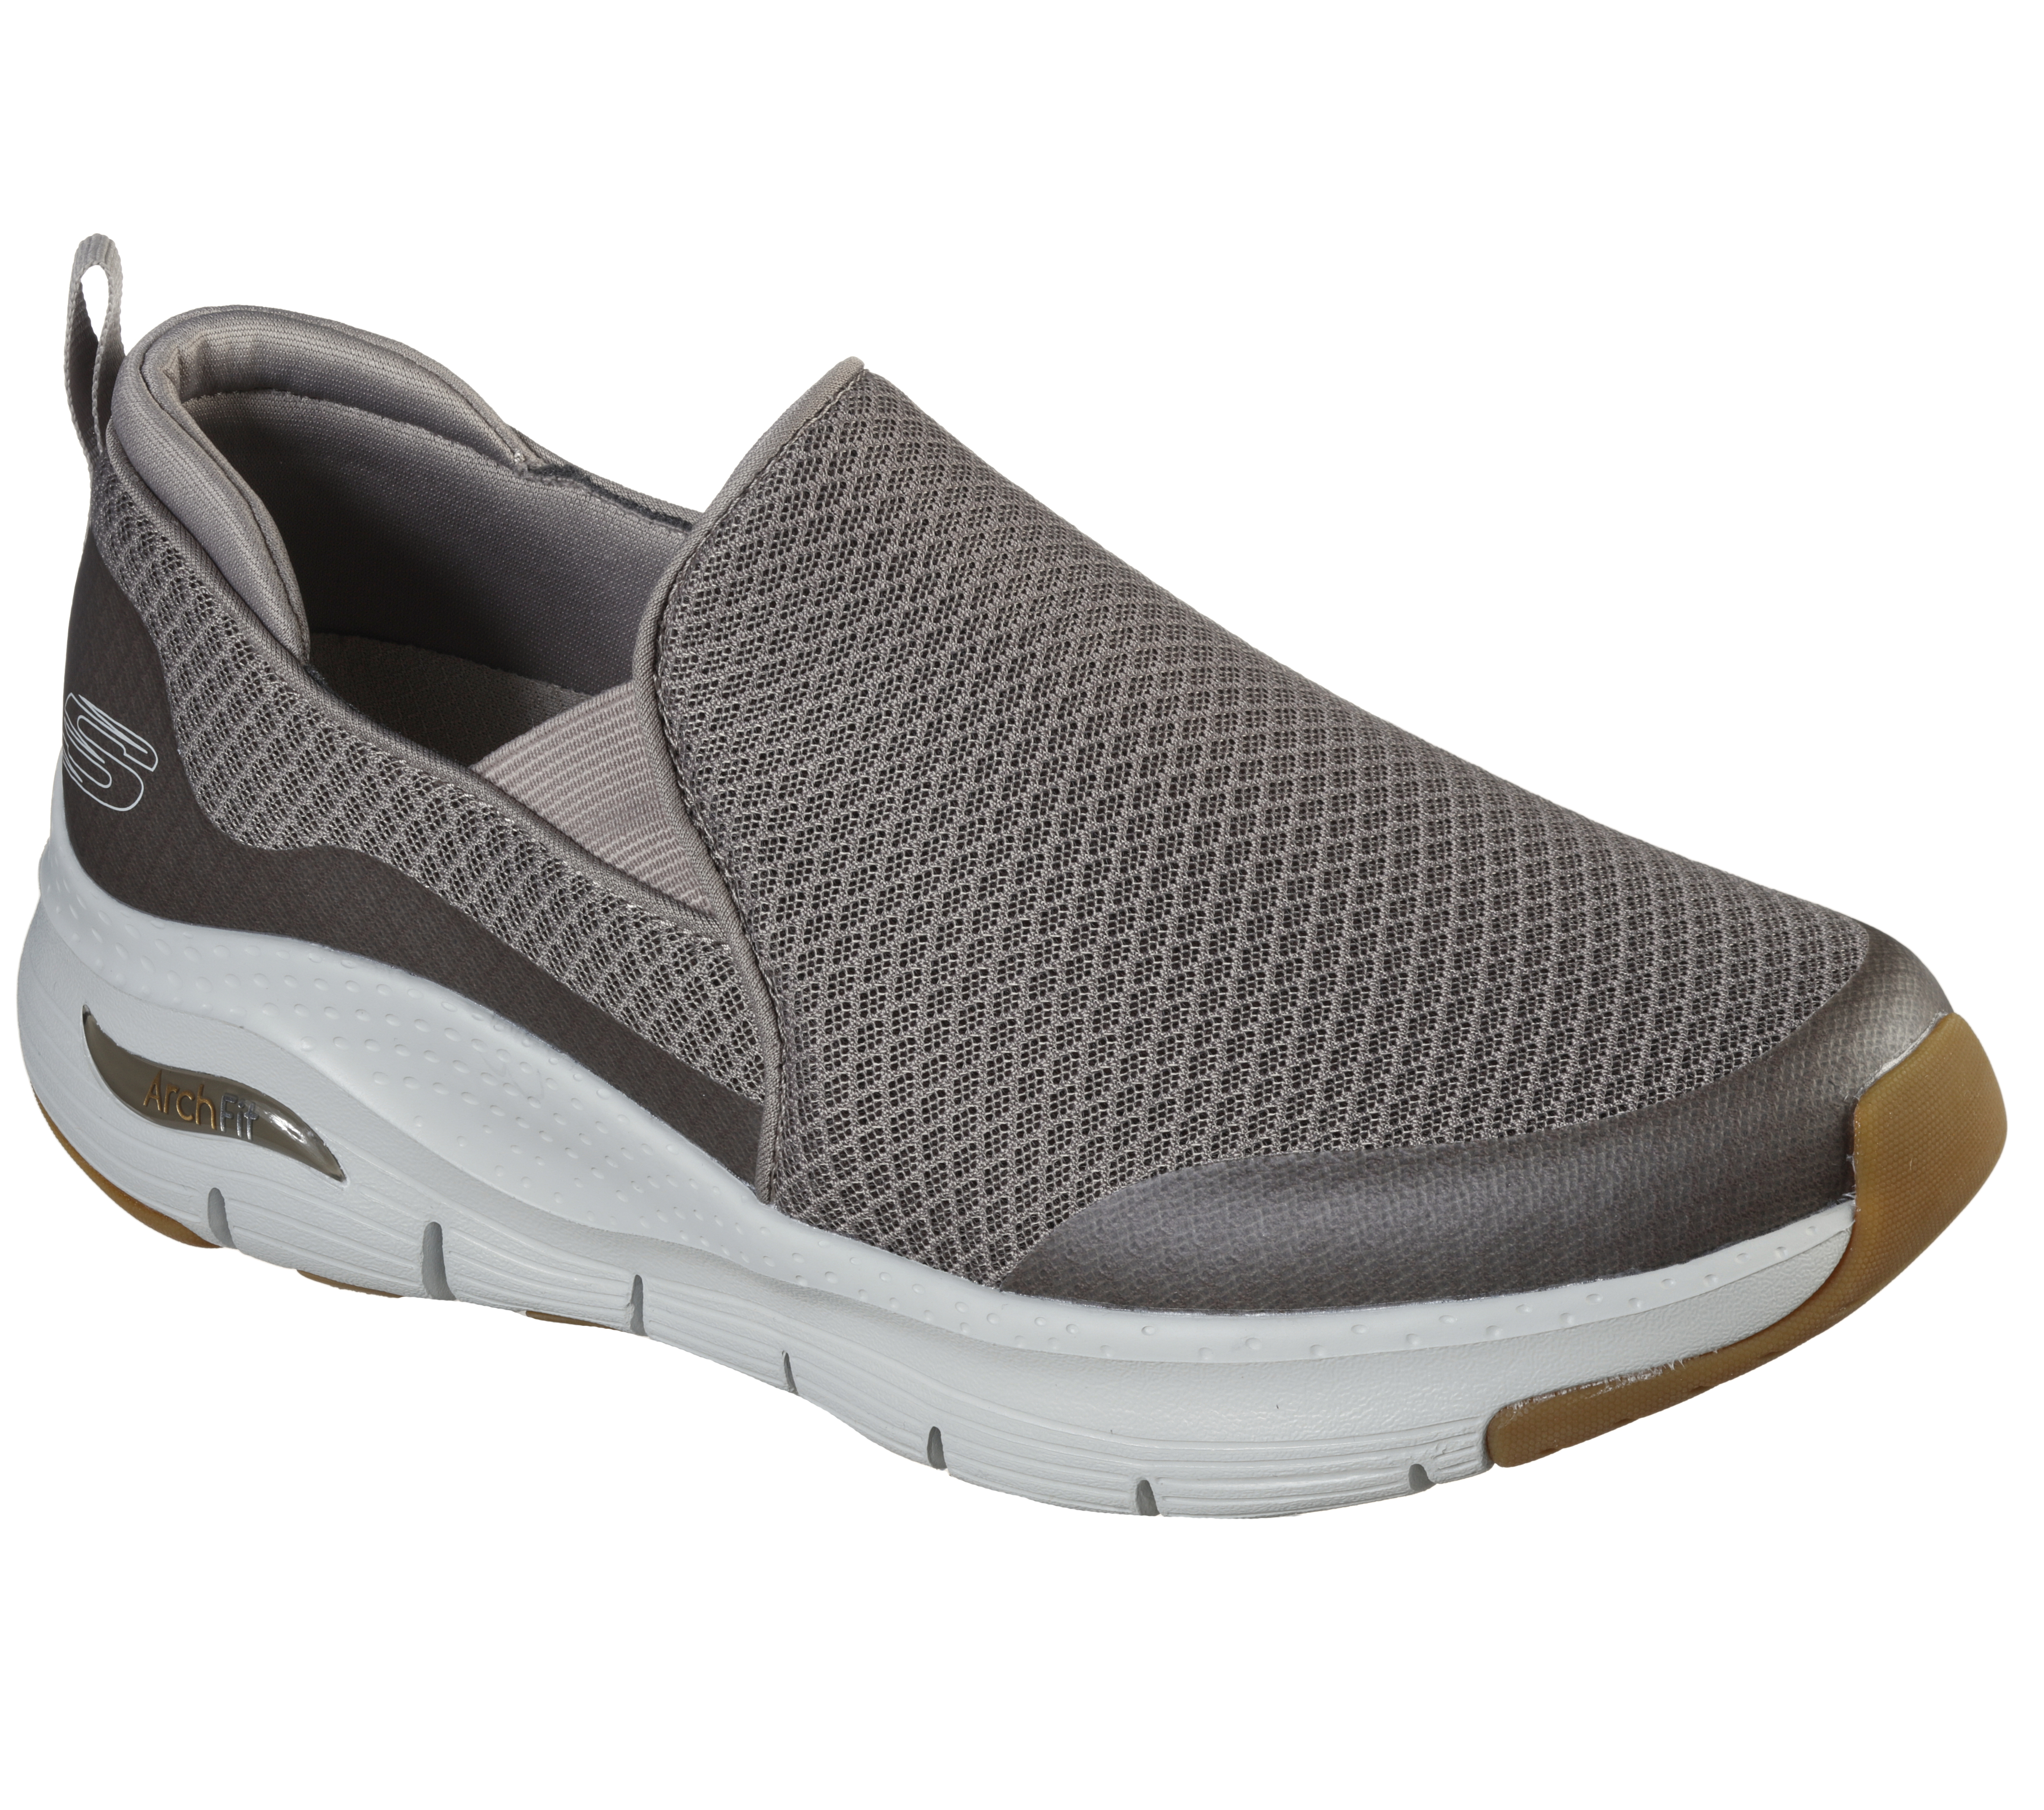 men's casual shoes with good arch support